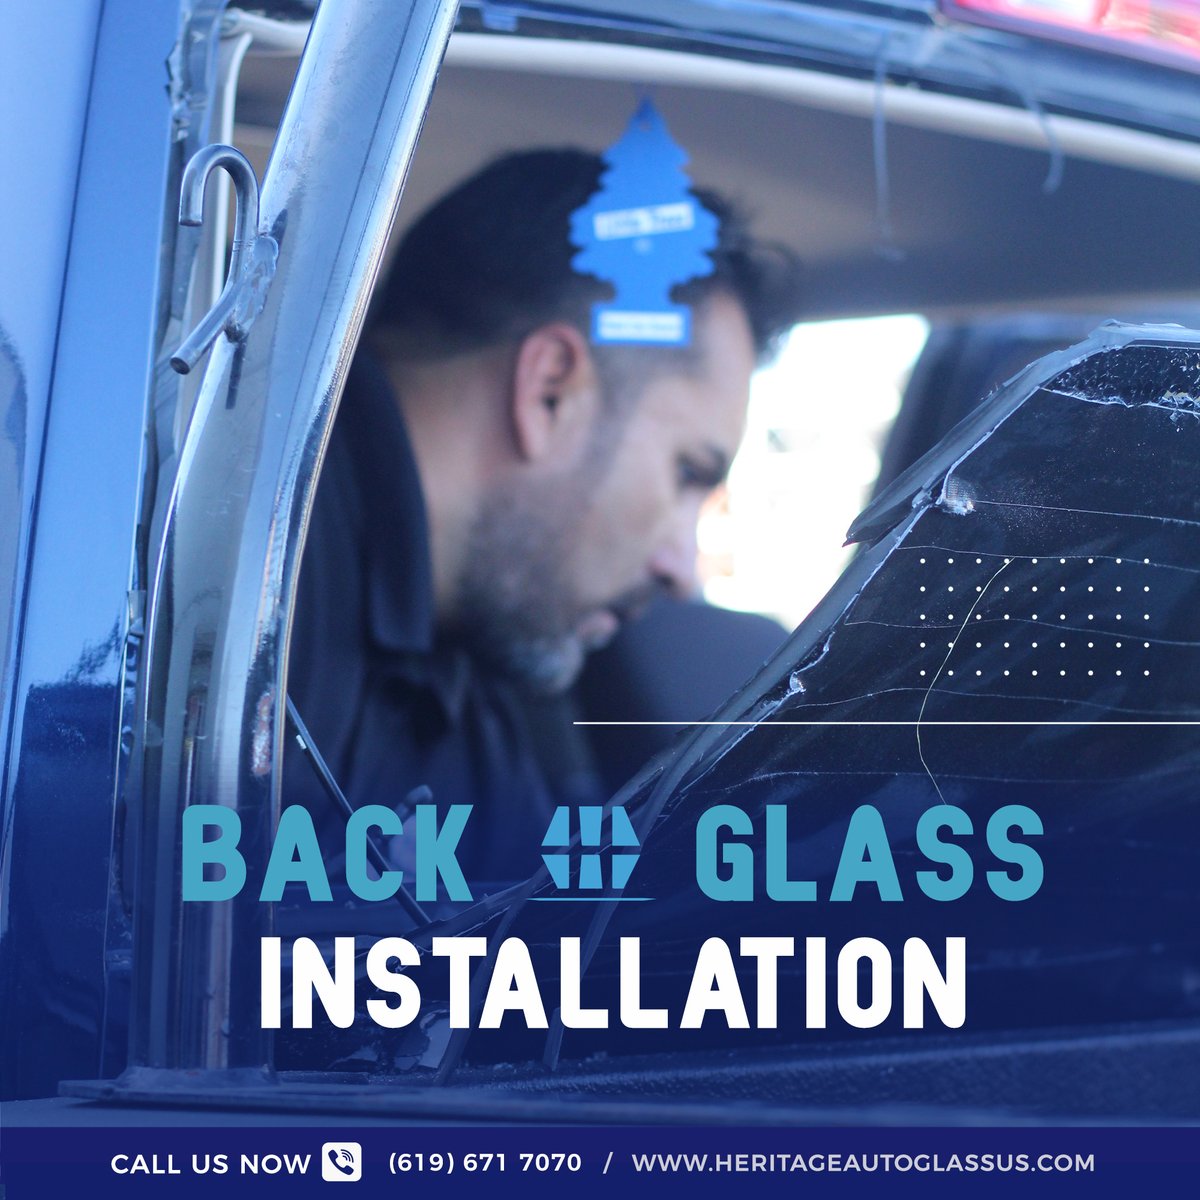 If your vehicle's rear window is damaged⚡, you must repair it as soon as possible for safety reasons. 

#heritageautoglass #heritagesandiego #autoglassrepair #windshieldreplace #backglassreplacement #backglassinstallation